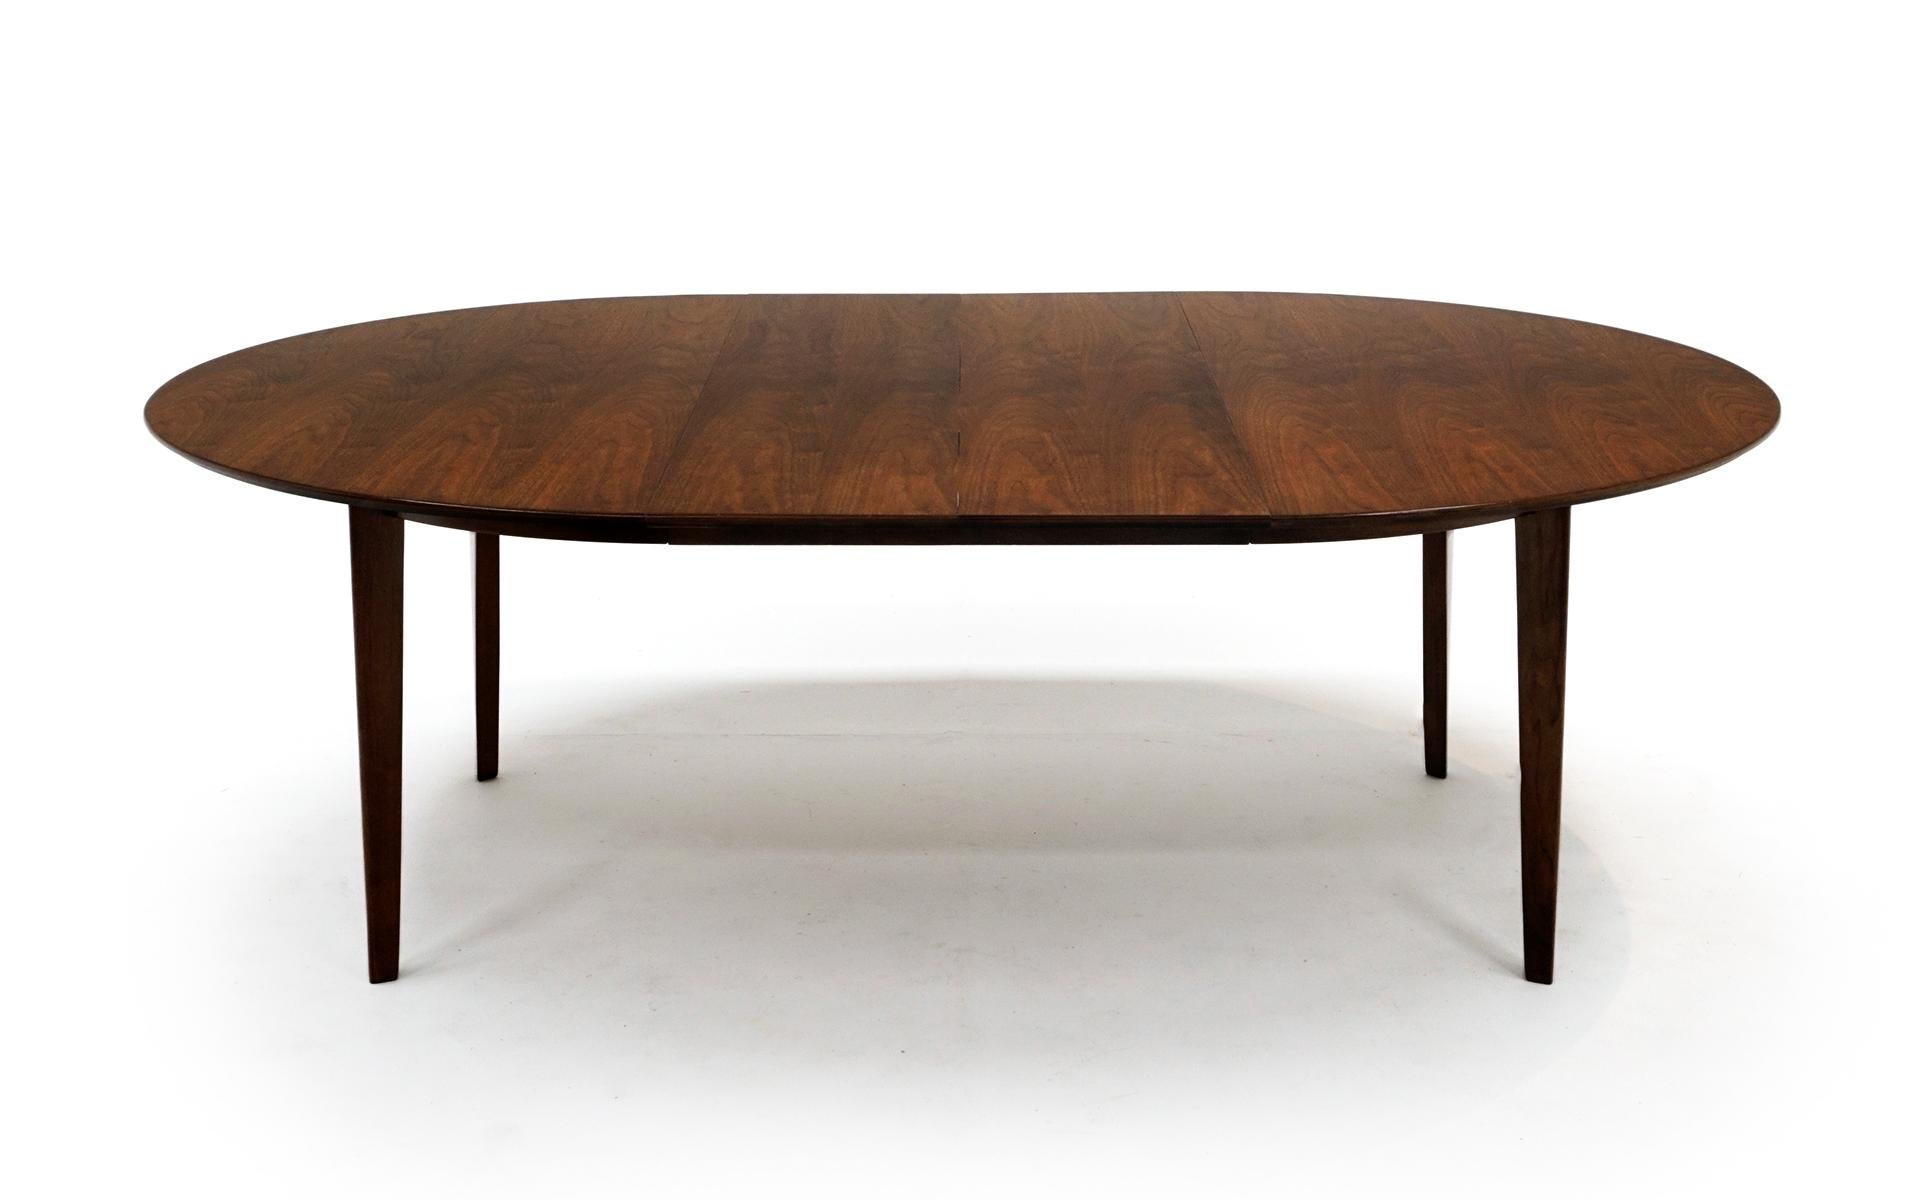 Mid-20th Century Expandable Dining Table by Edward Wormley for Dunbar, Almost Round to Oval